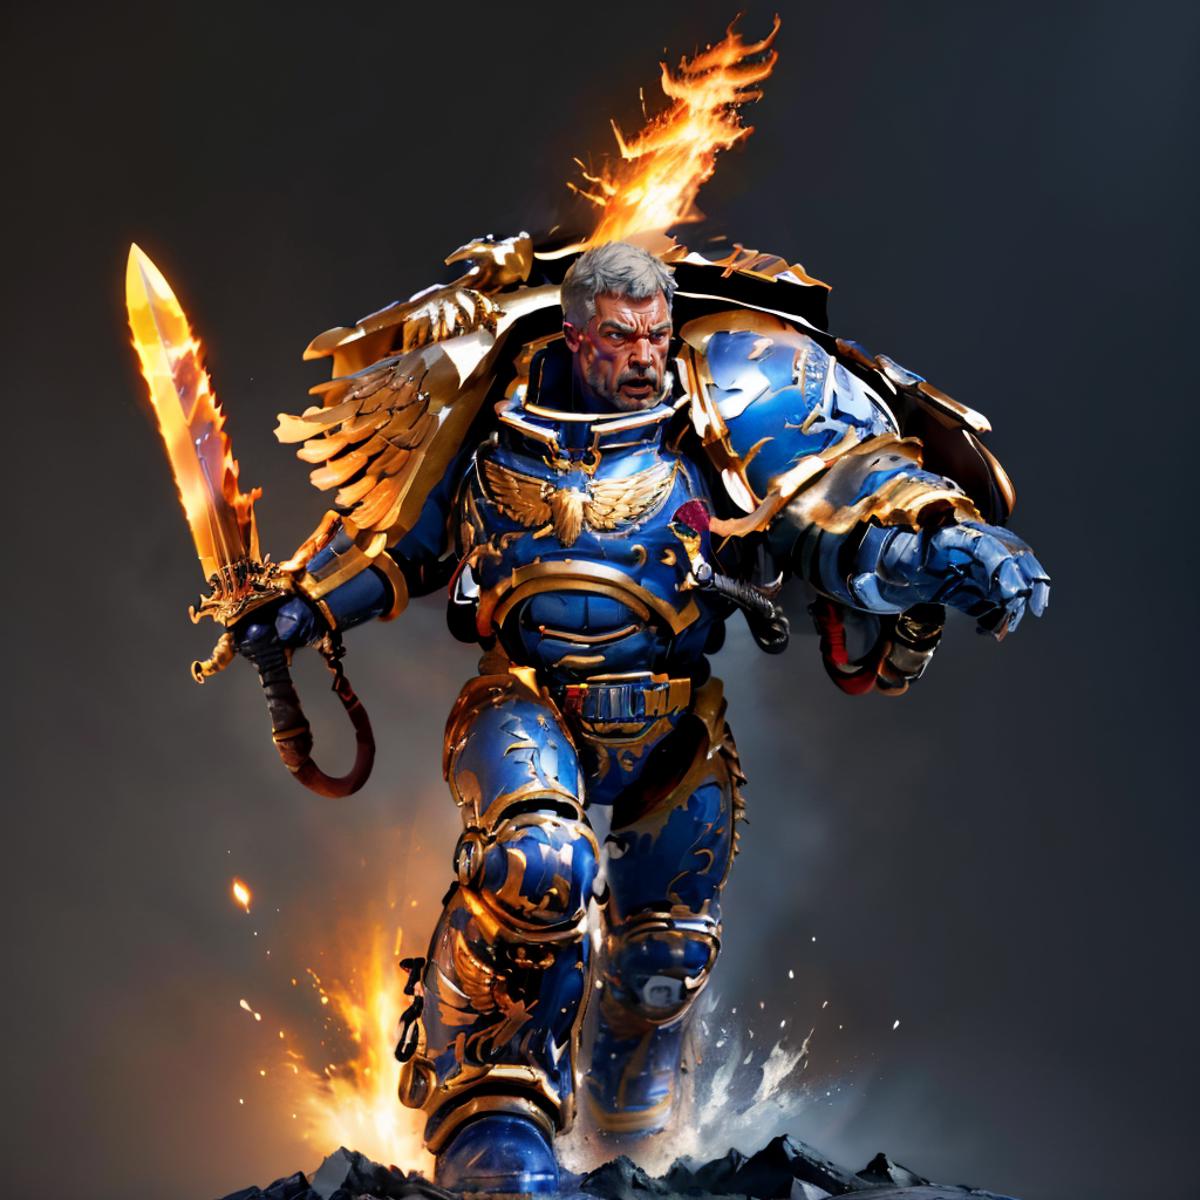 Roboute Guilliman, the Avenging Son image by Ggrue